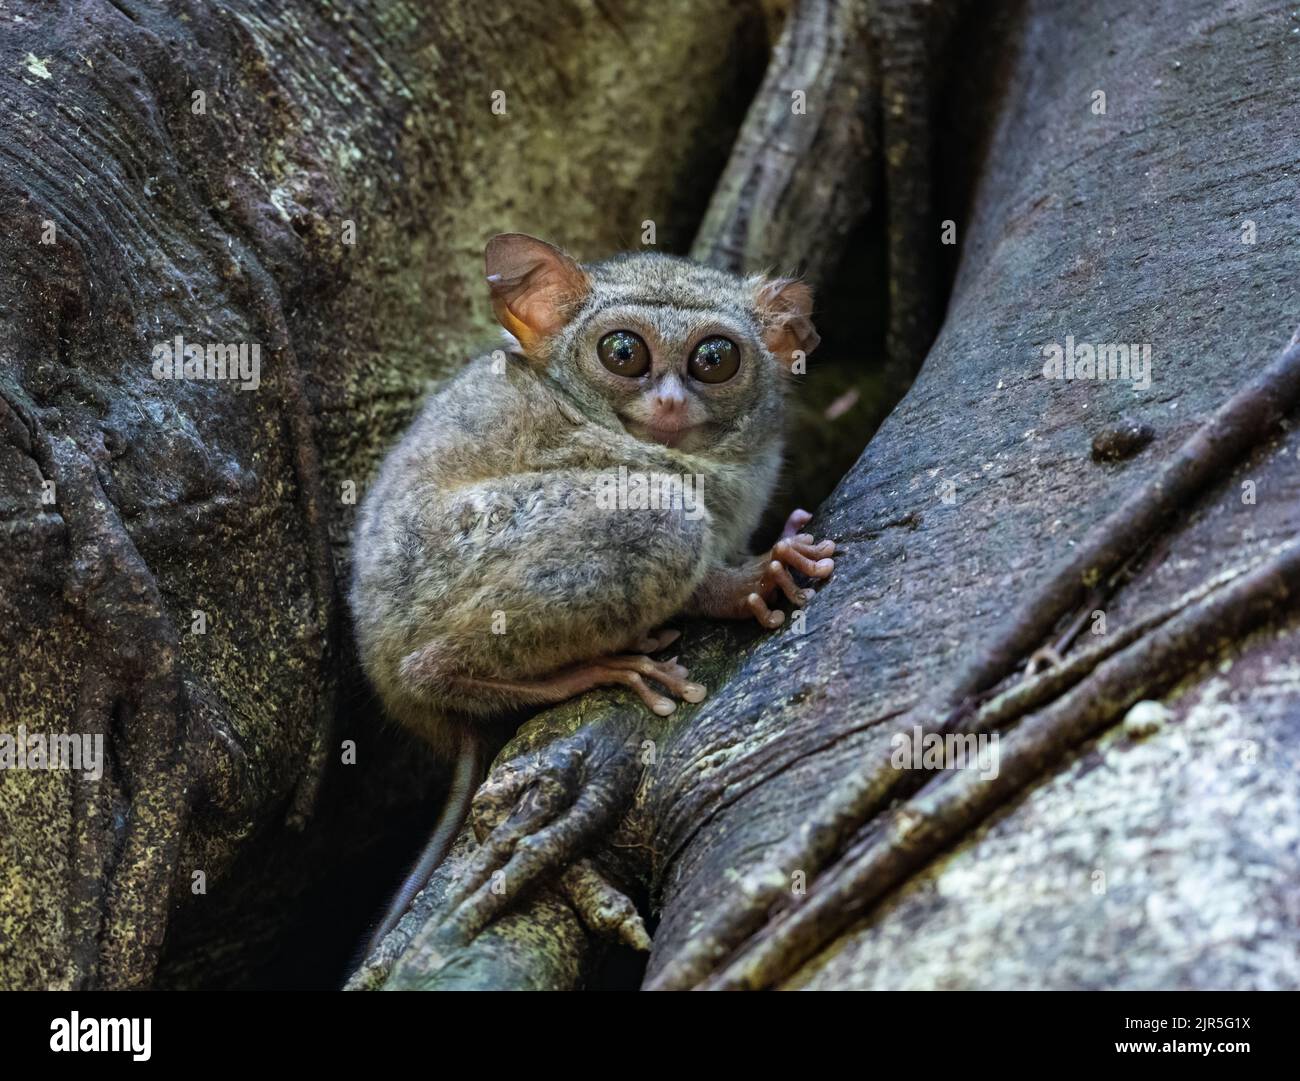 A small primate Spectral Tarsier (Tarsius spectrum) sitting on a tree trunk in the wild.  Tangkoko National Park, Sulawesi, Indonesia. Stock Photo